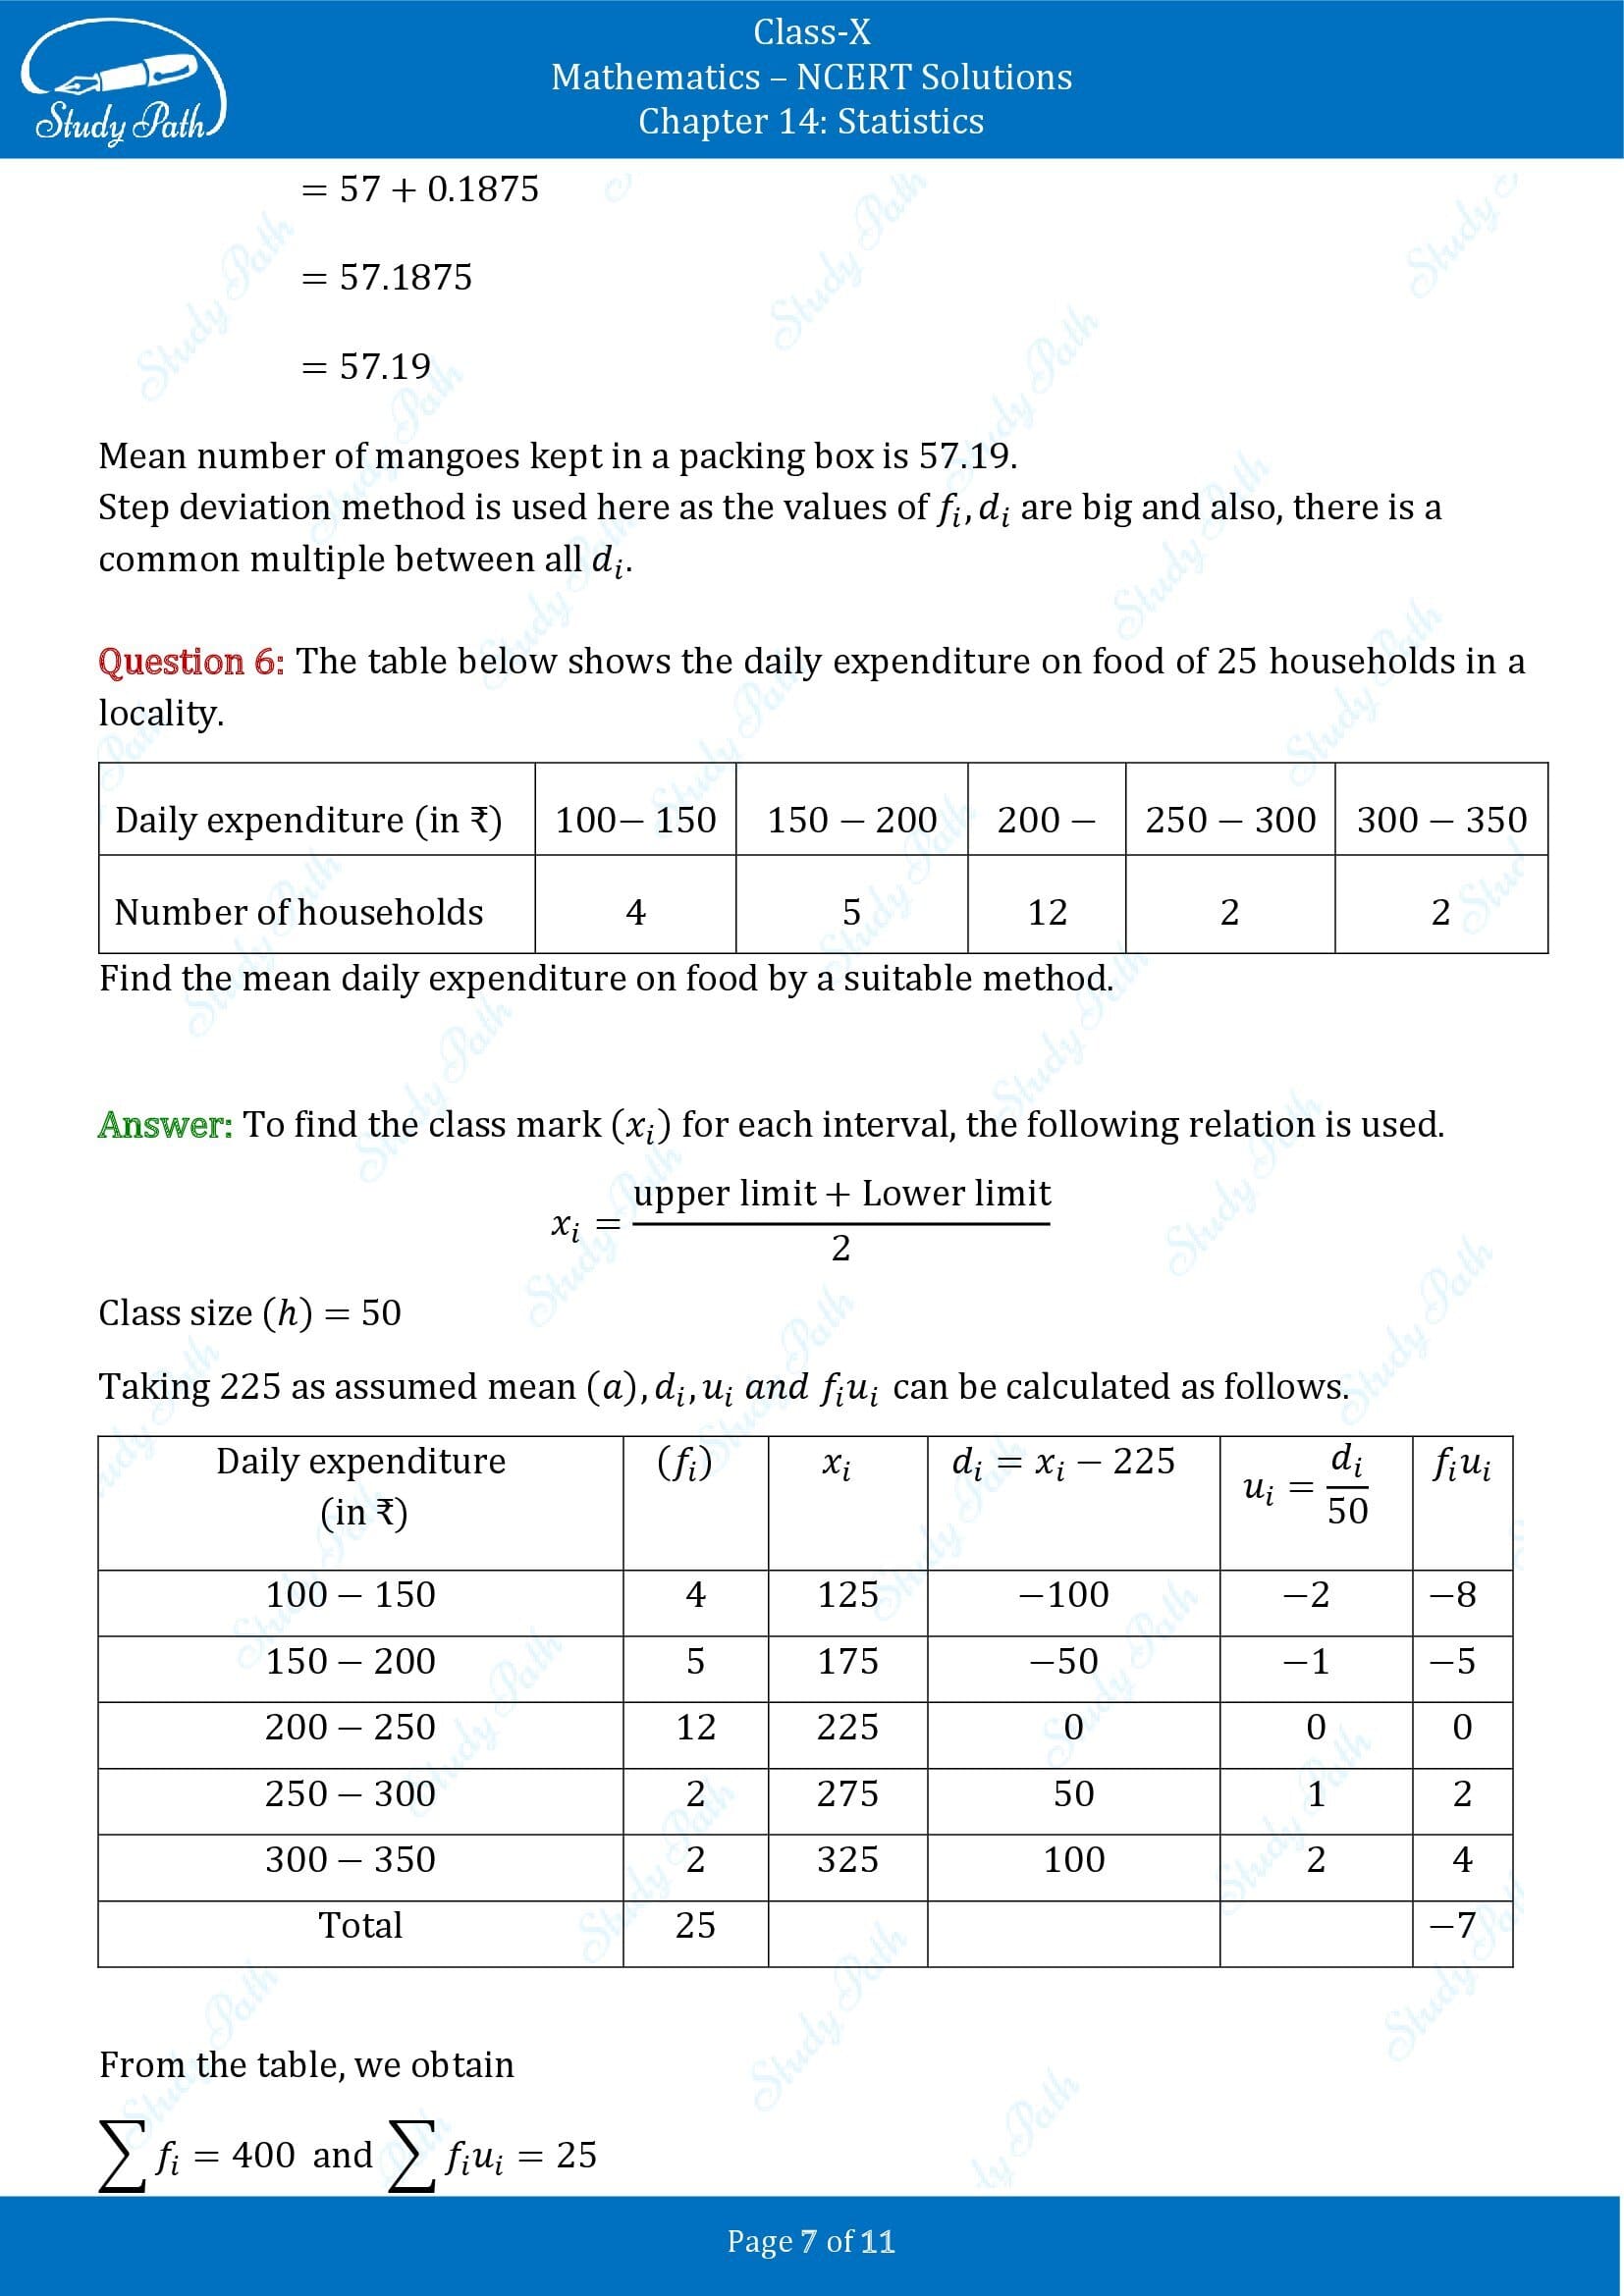 NCERT Solutions for Class 10 Maths Chapter 14 Statistics Exercise 14.1 00007